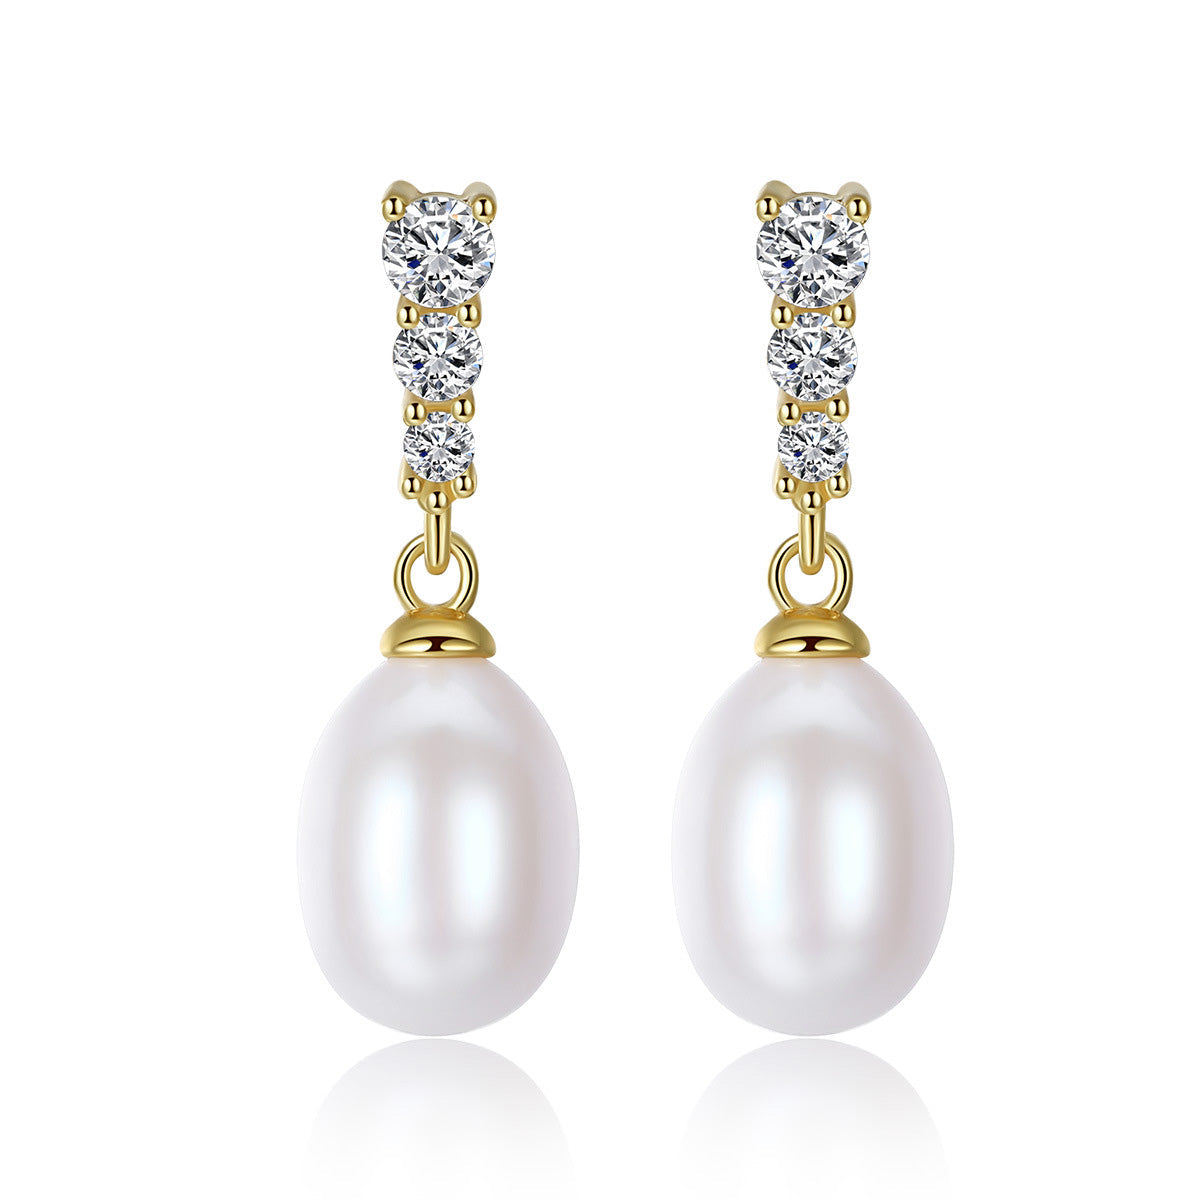 Real Pearl Necklace and Earring Set